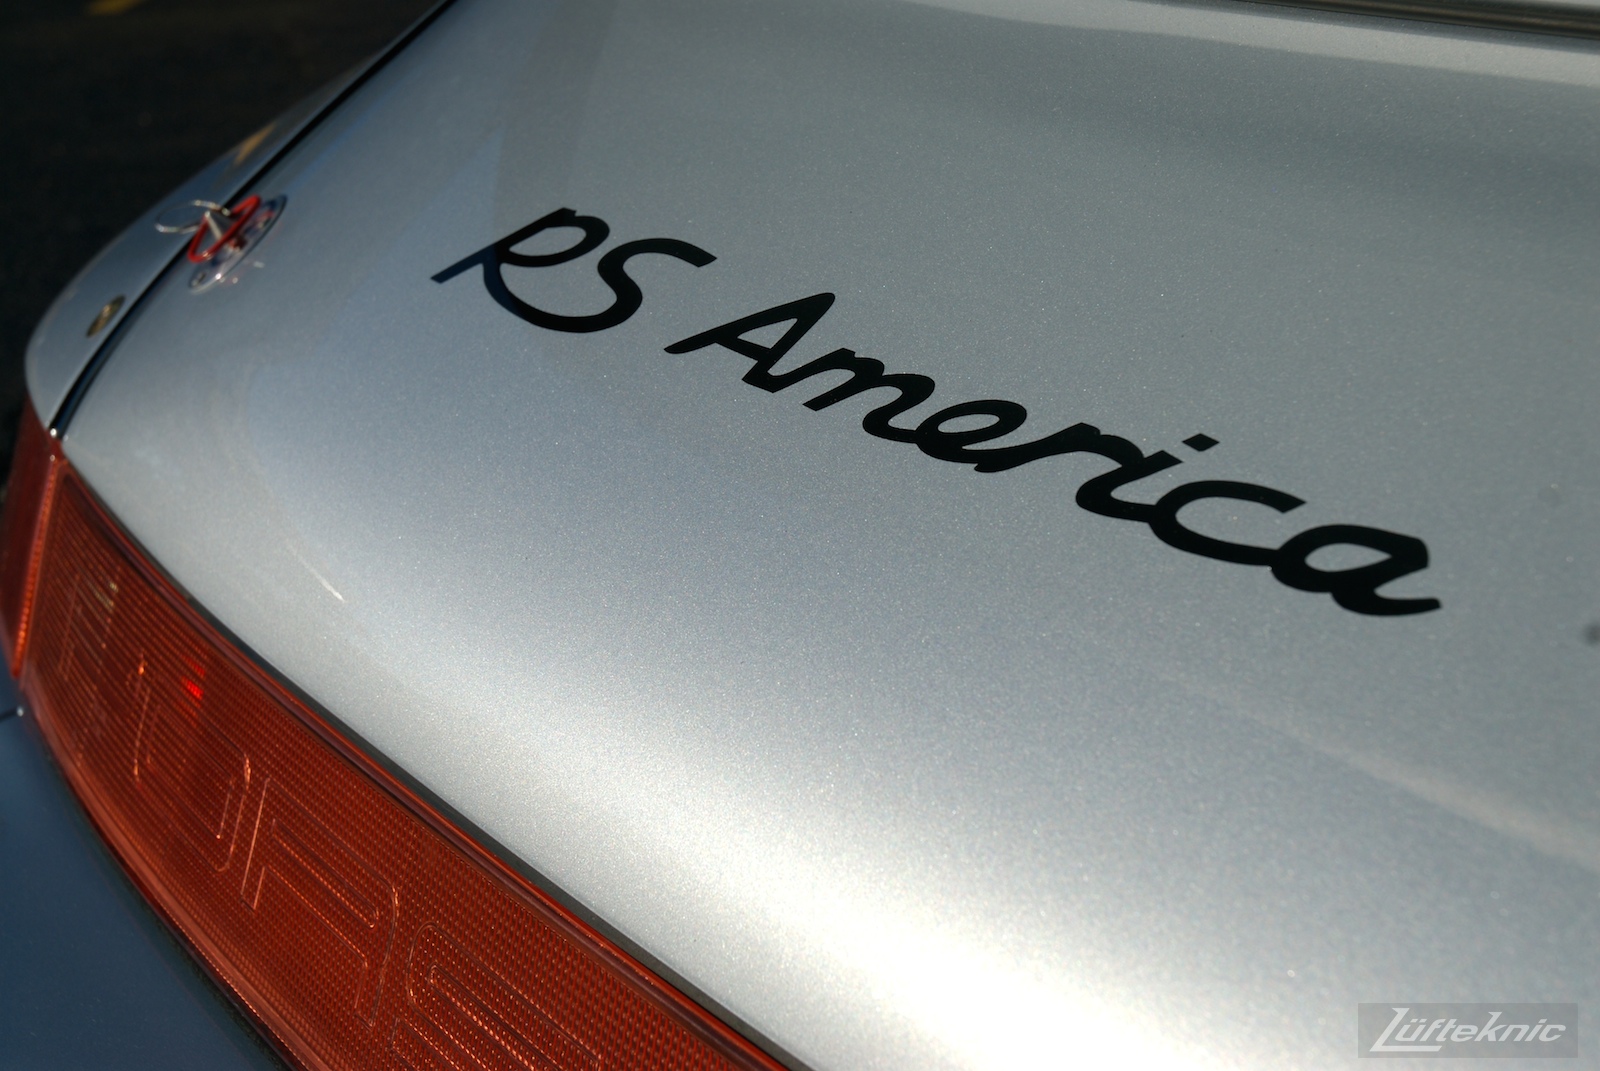 RS America graphics painted onto the rear decklid.